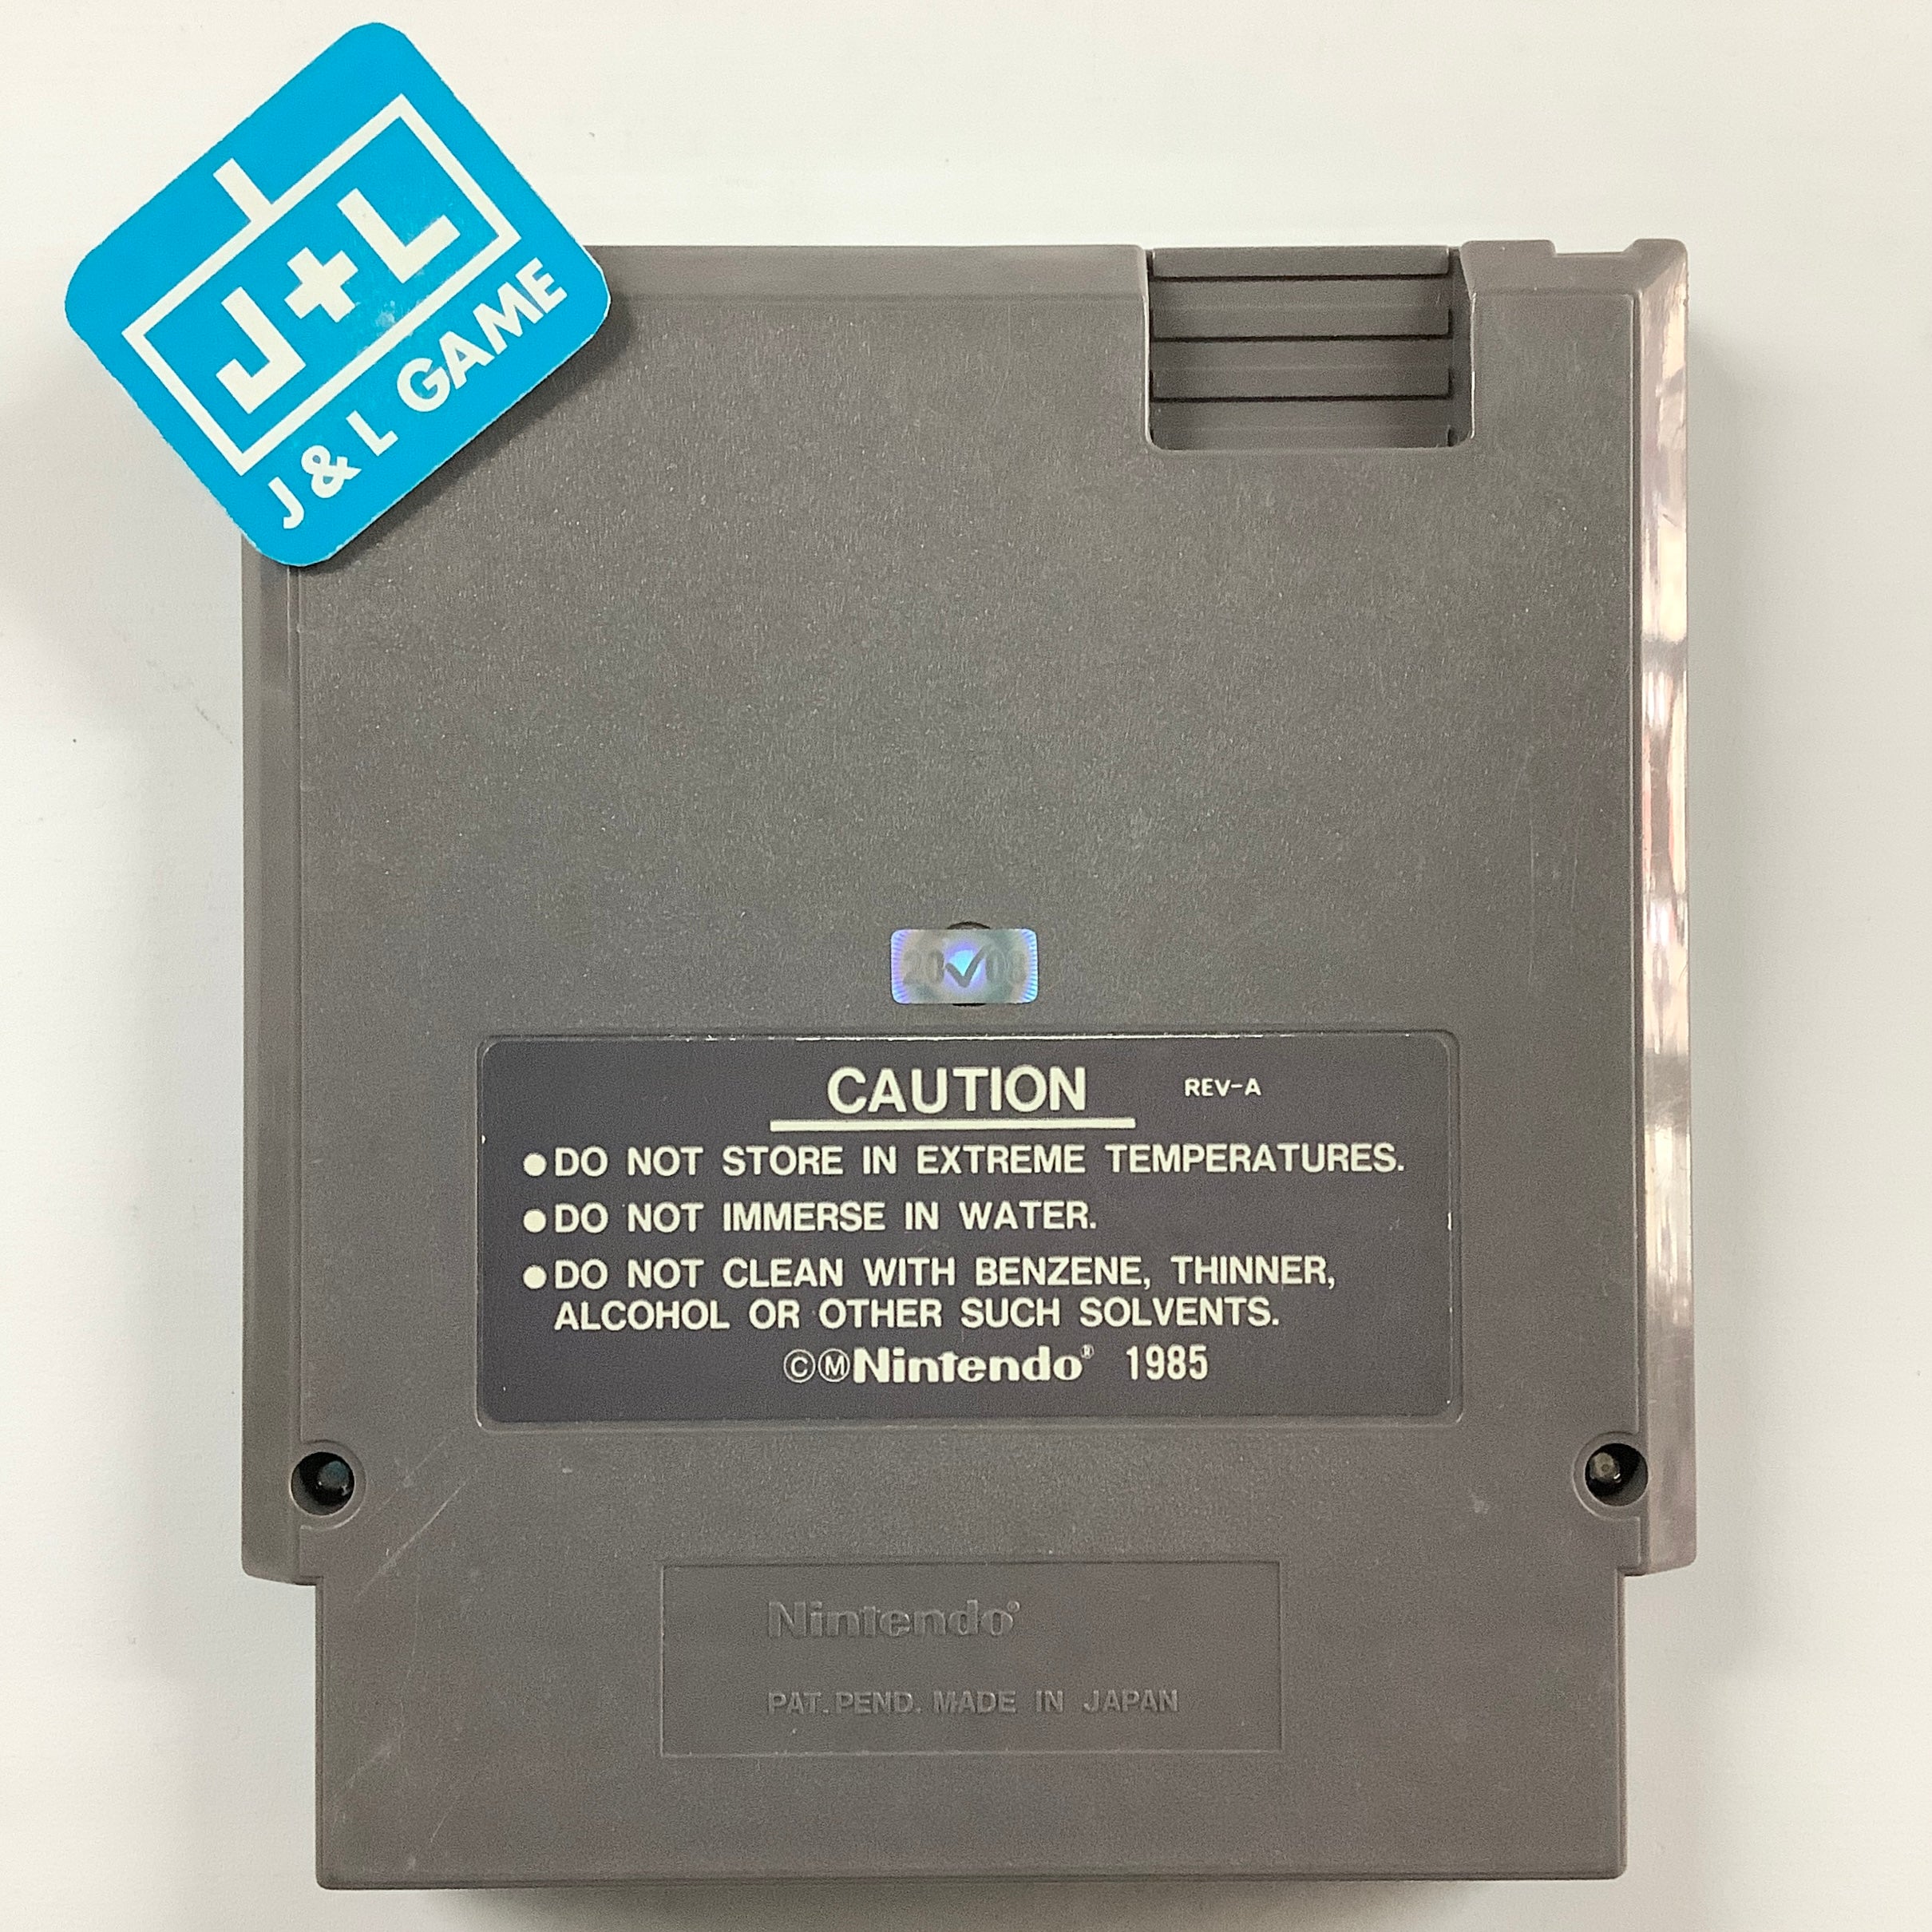 Defender of the Crown - (NES) Nintendo Entertainment System [Pre-Owned] Video Games Ultra   